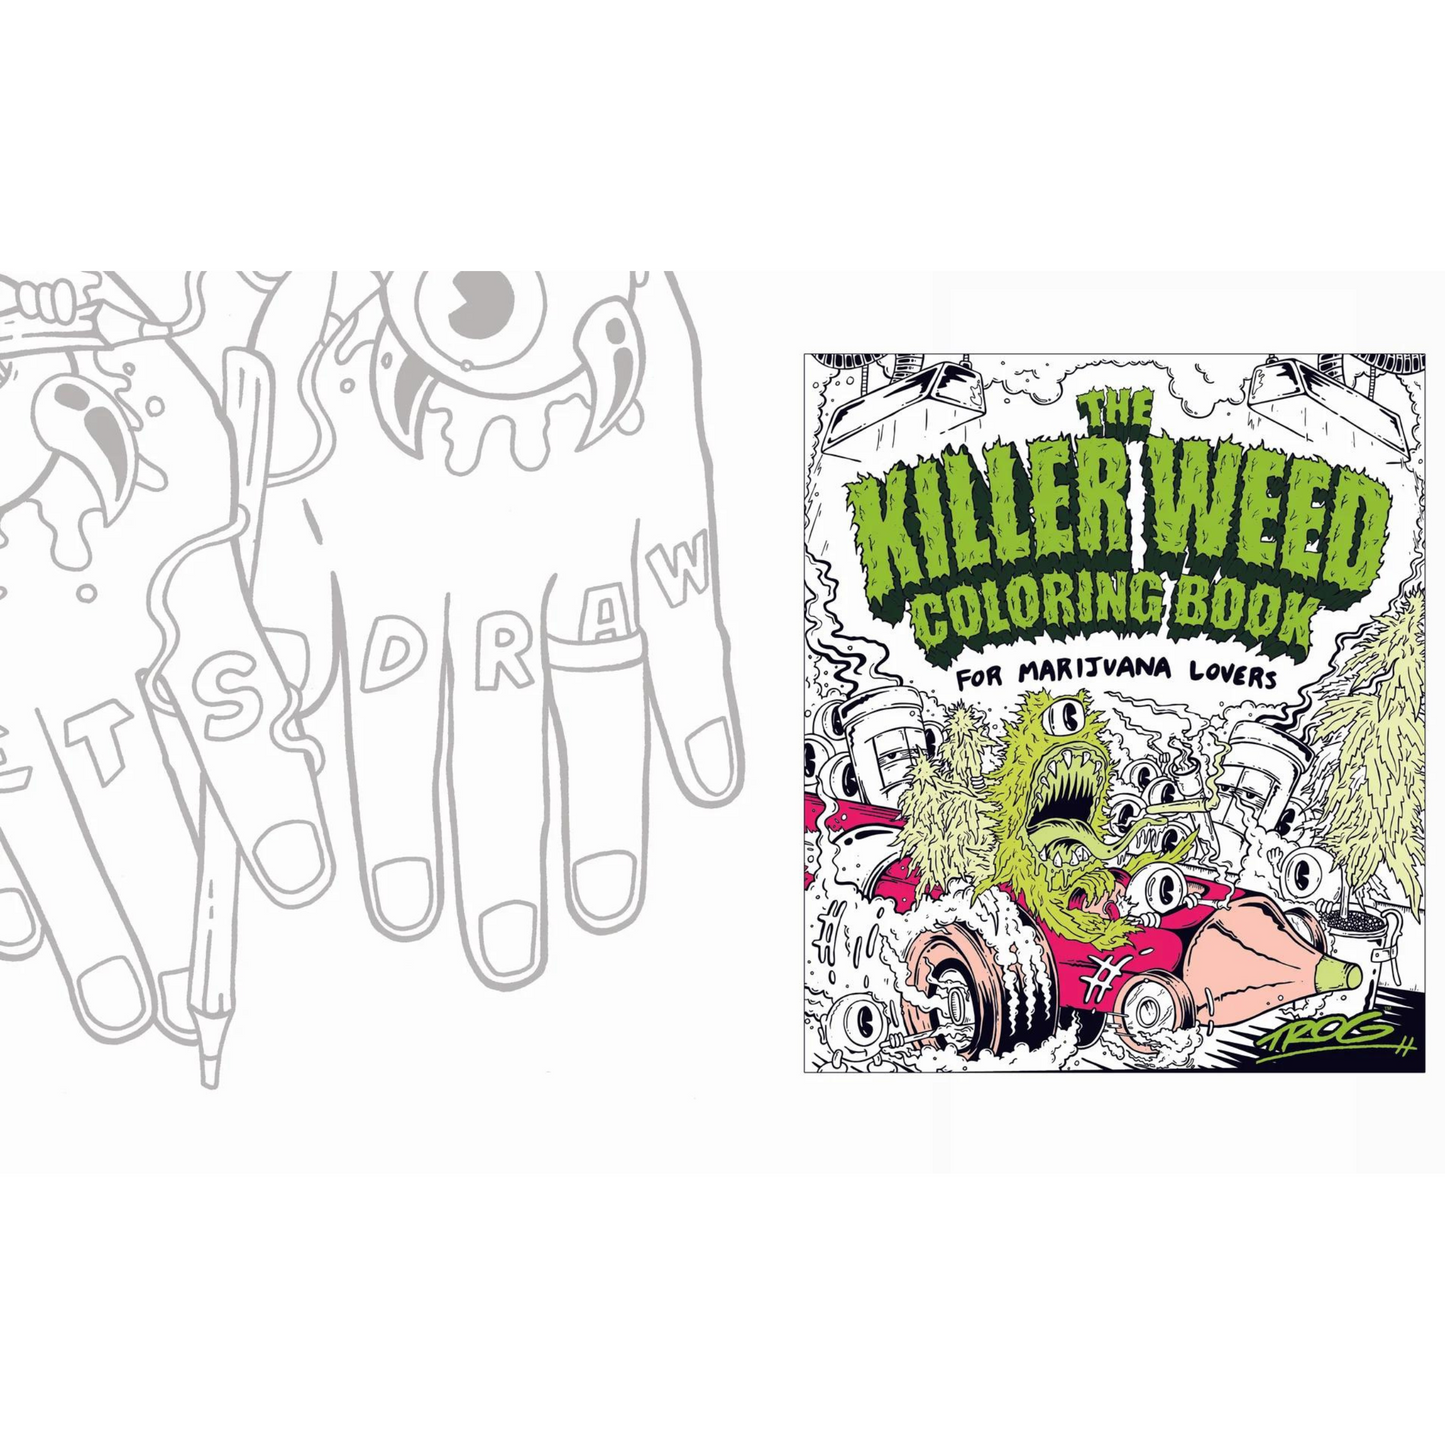 TROG - The Killer Weed Coloring Book